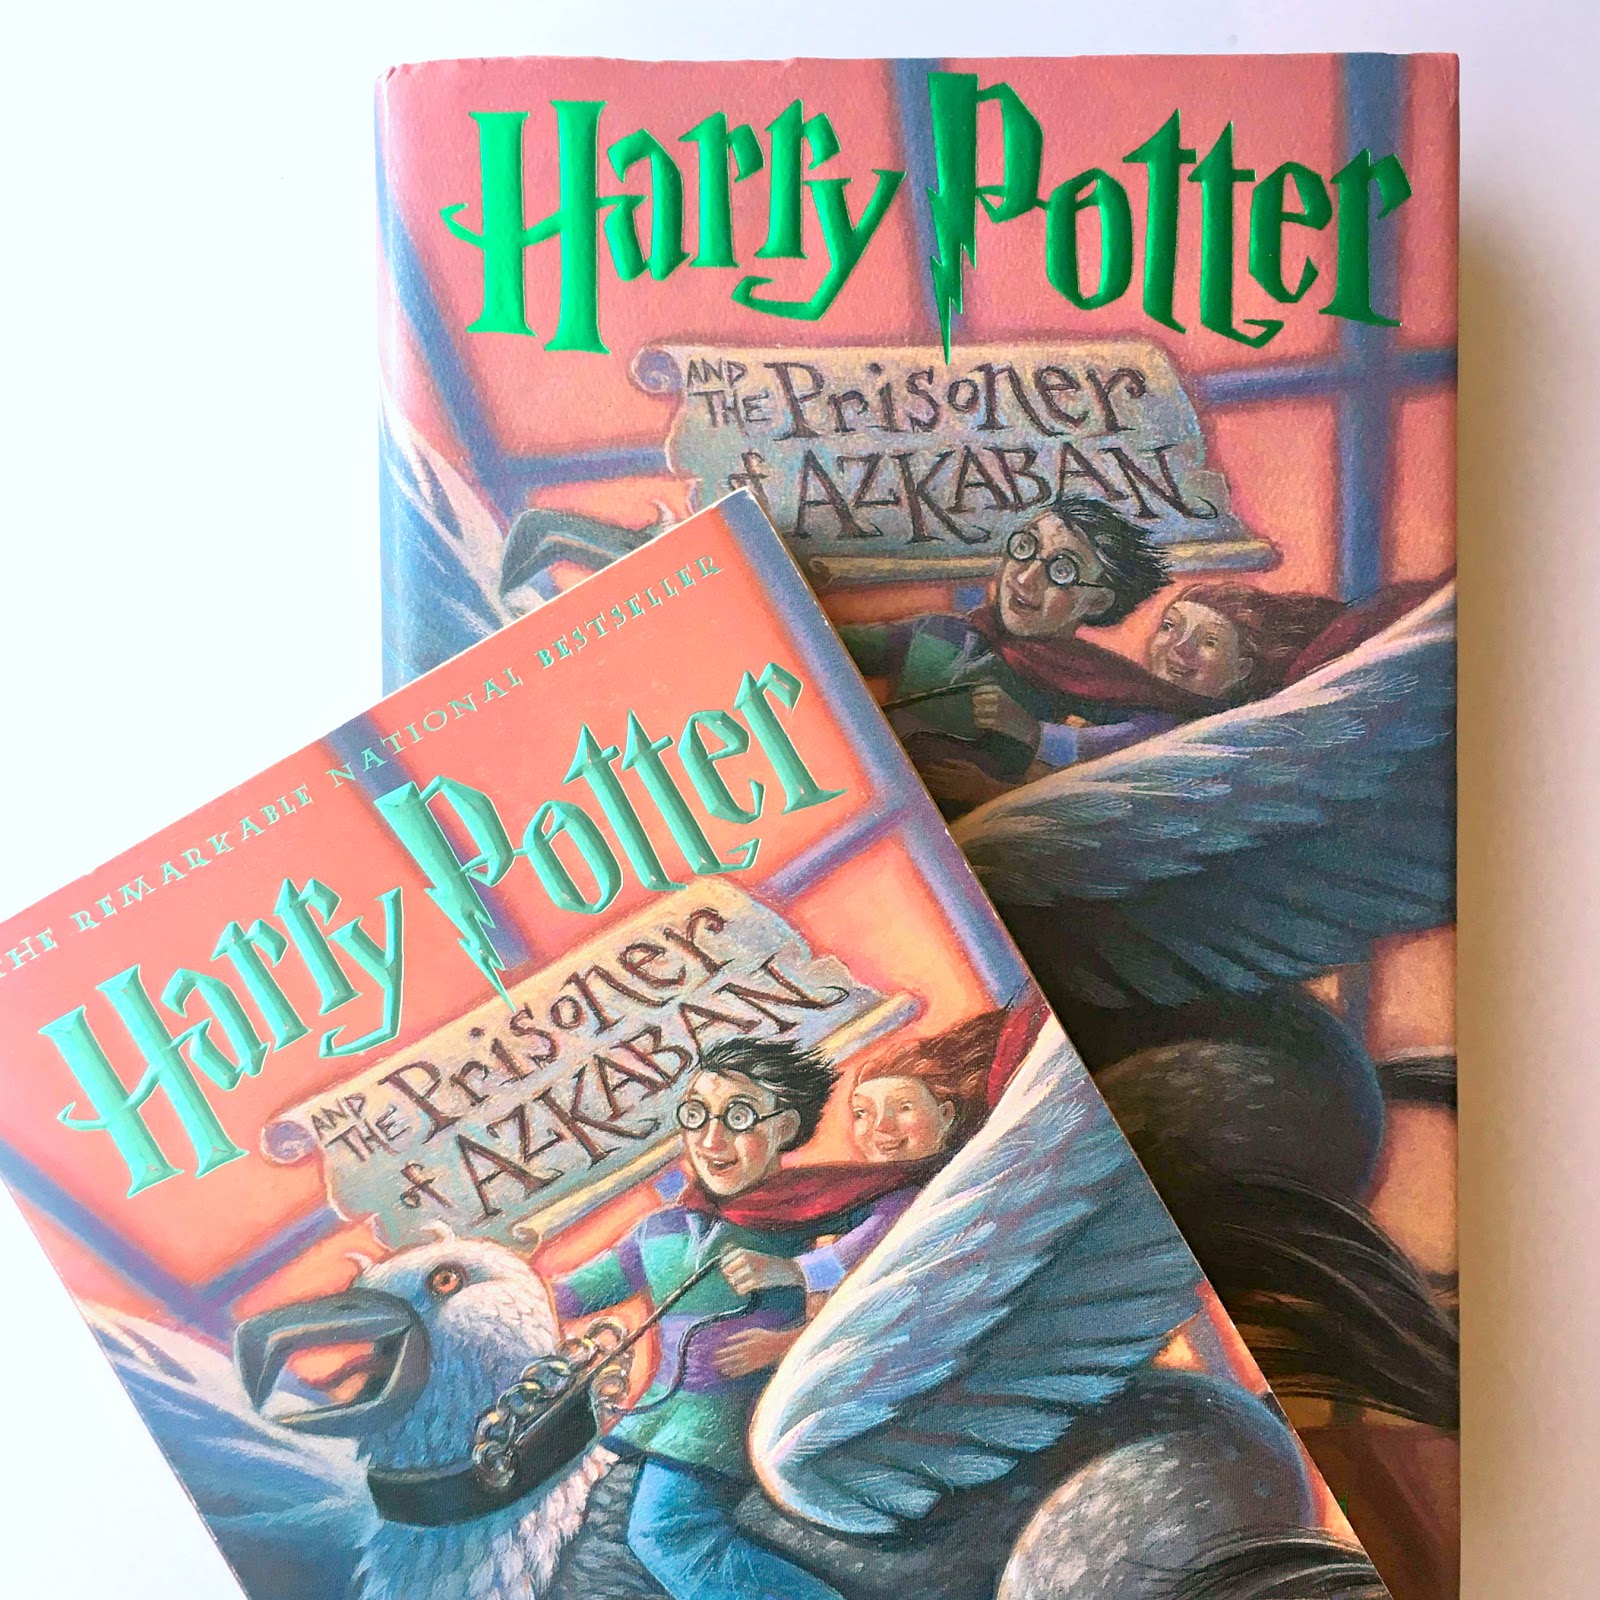 📚 Only a Person Who Has Read Enough Books Can Get 15/20 on This Quiz Harry Potter and the Prisoner of Azkaban